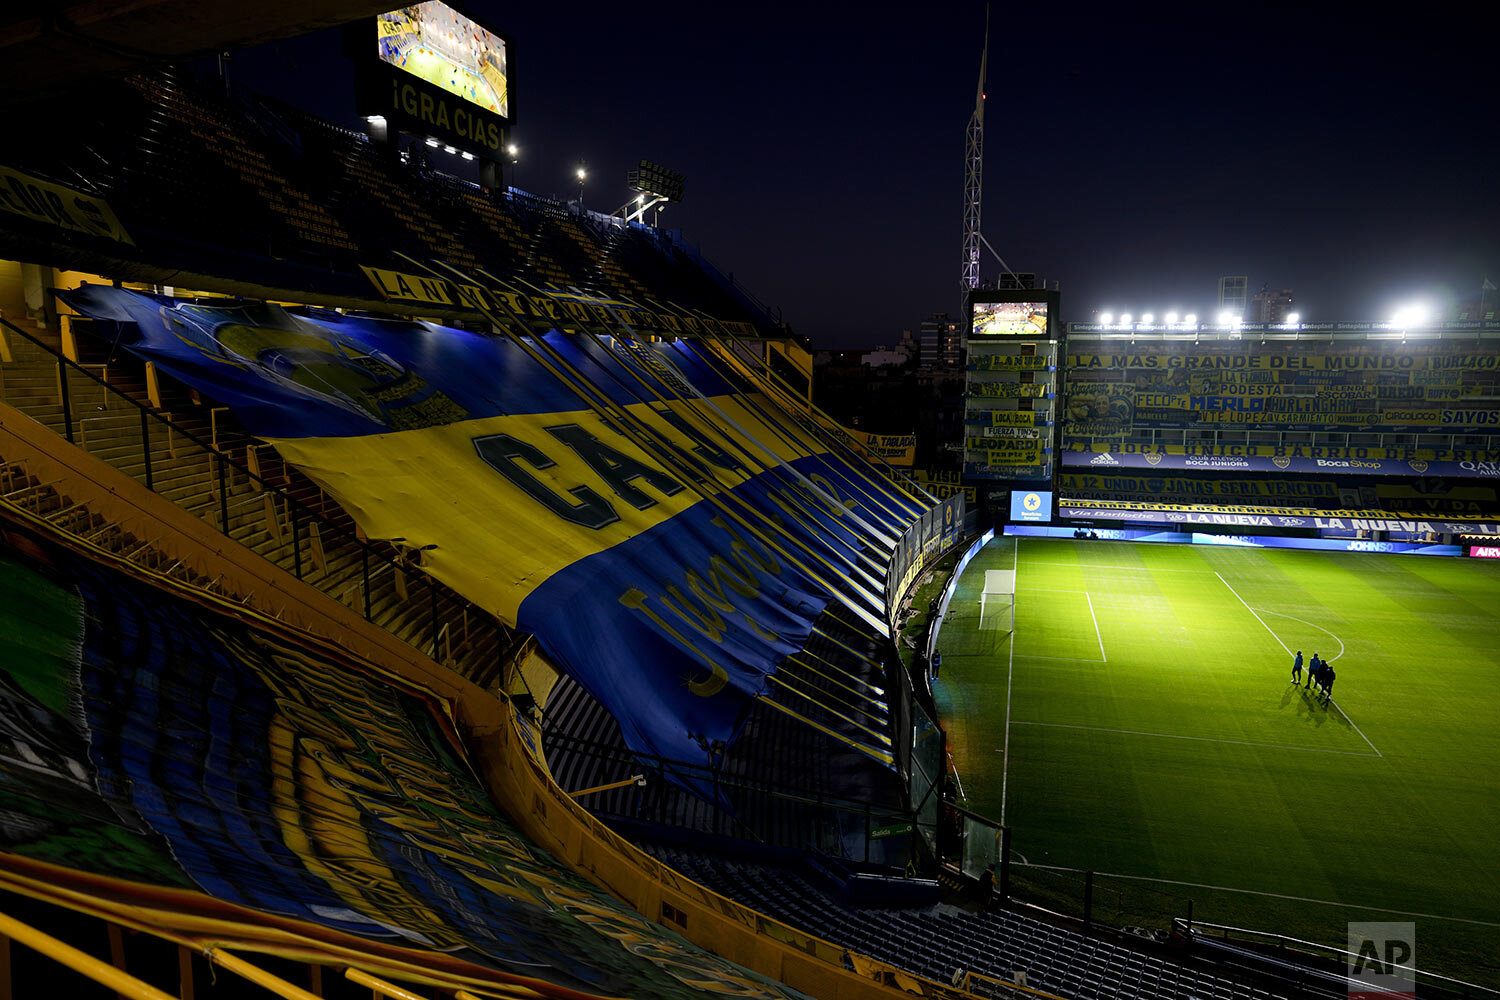  Soccer players walk on the field of the empty Bombonera stadium prior to a match between Boca Juniors and Racing Club in Buenos Aires, Argentina, Aug. 30, 2021. (AP Photo/Natacha Pisarenko) 